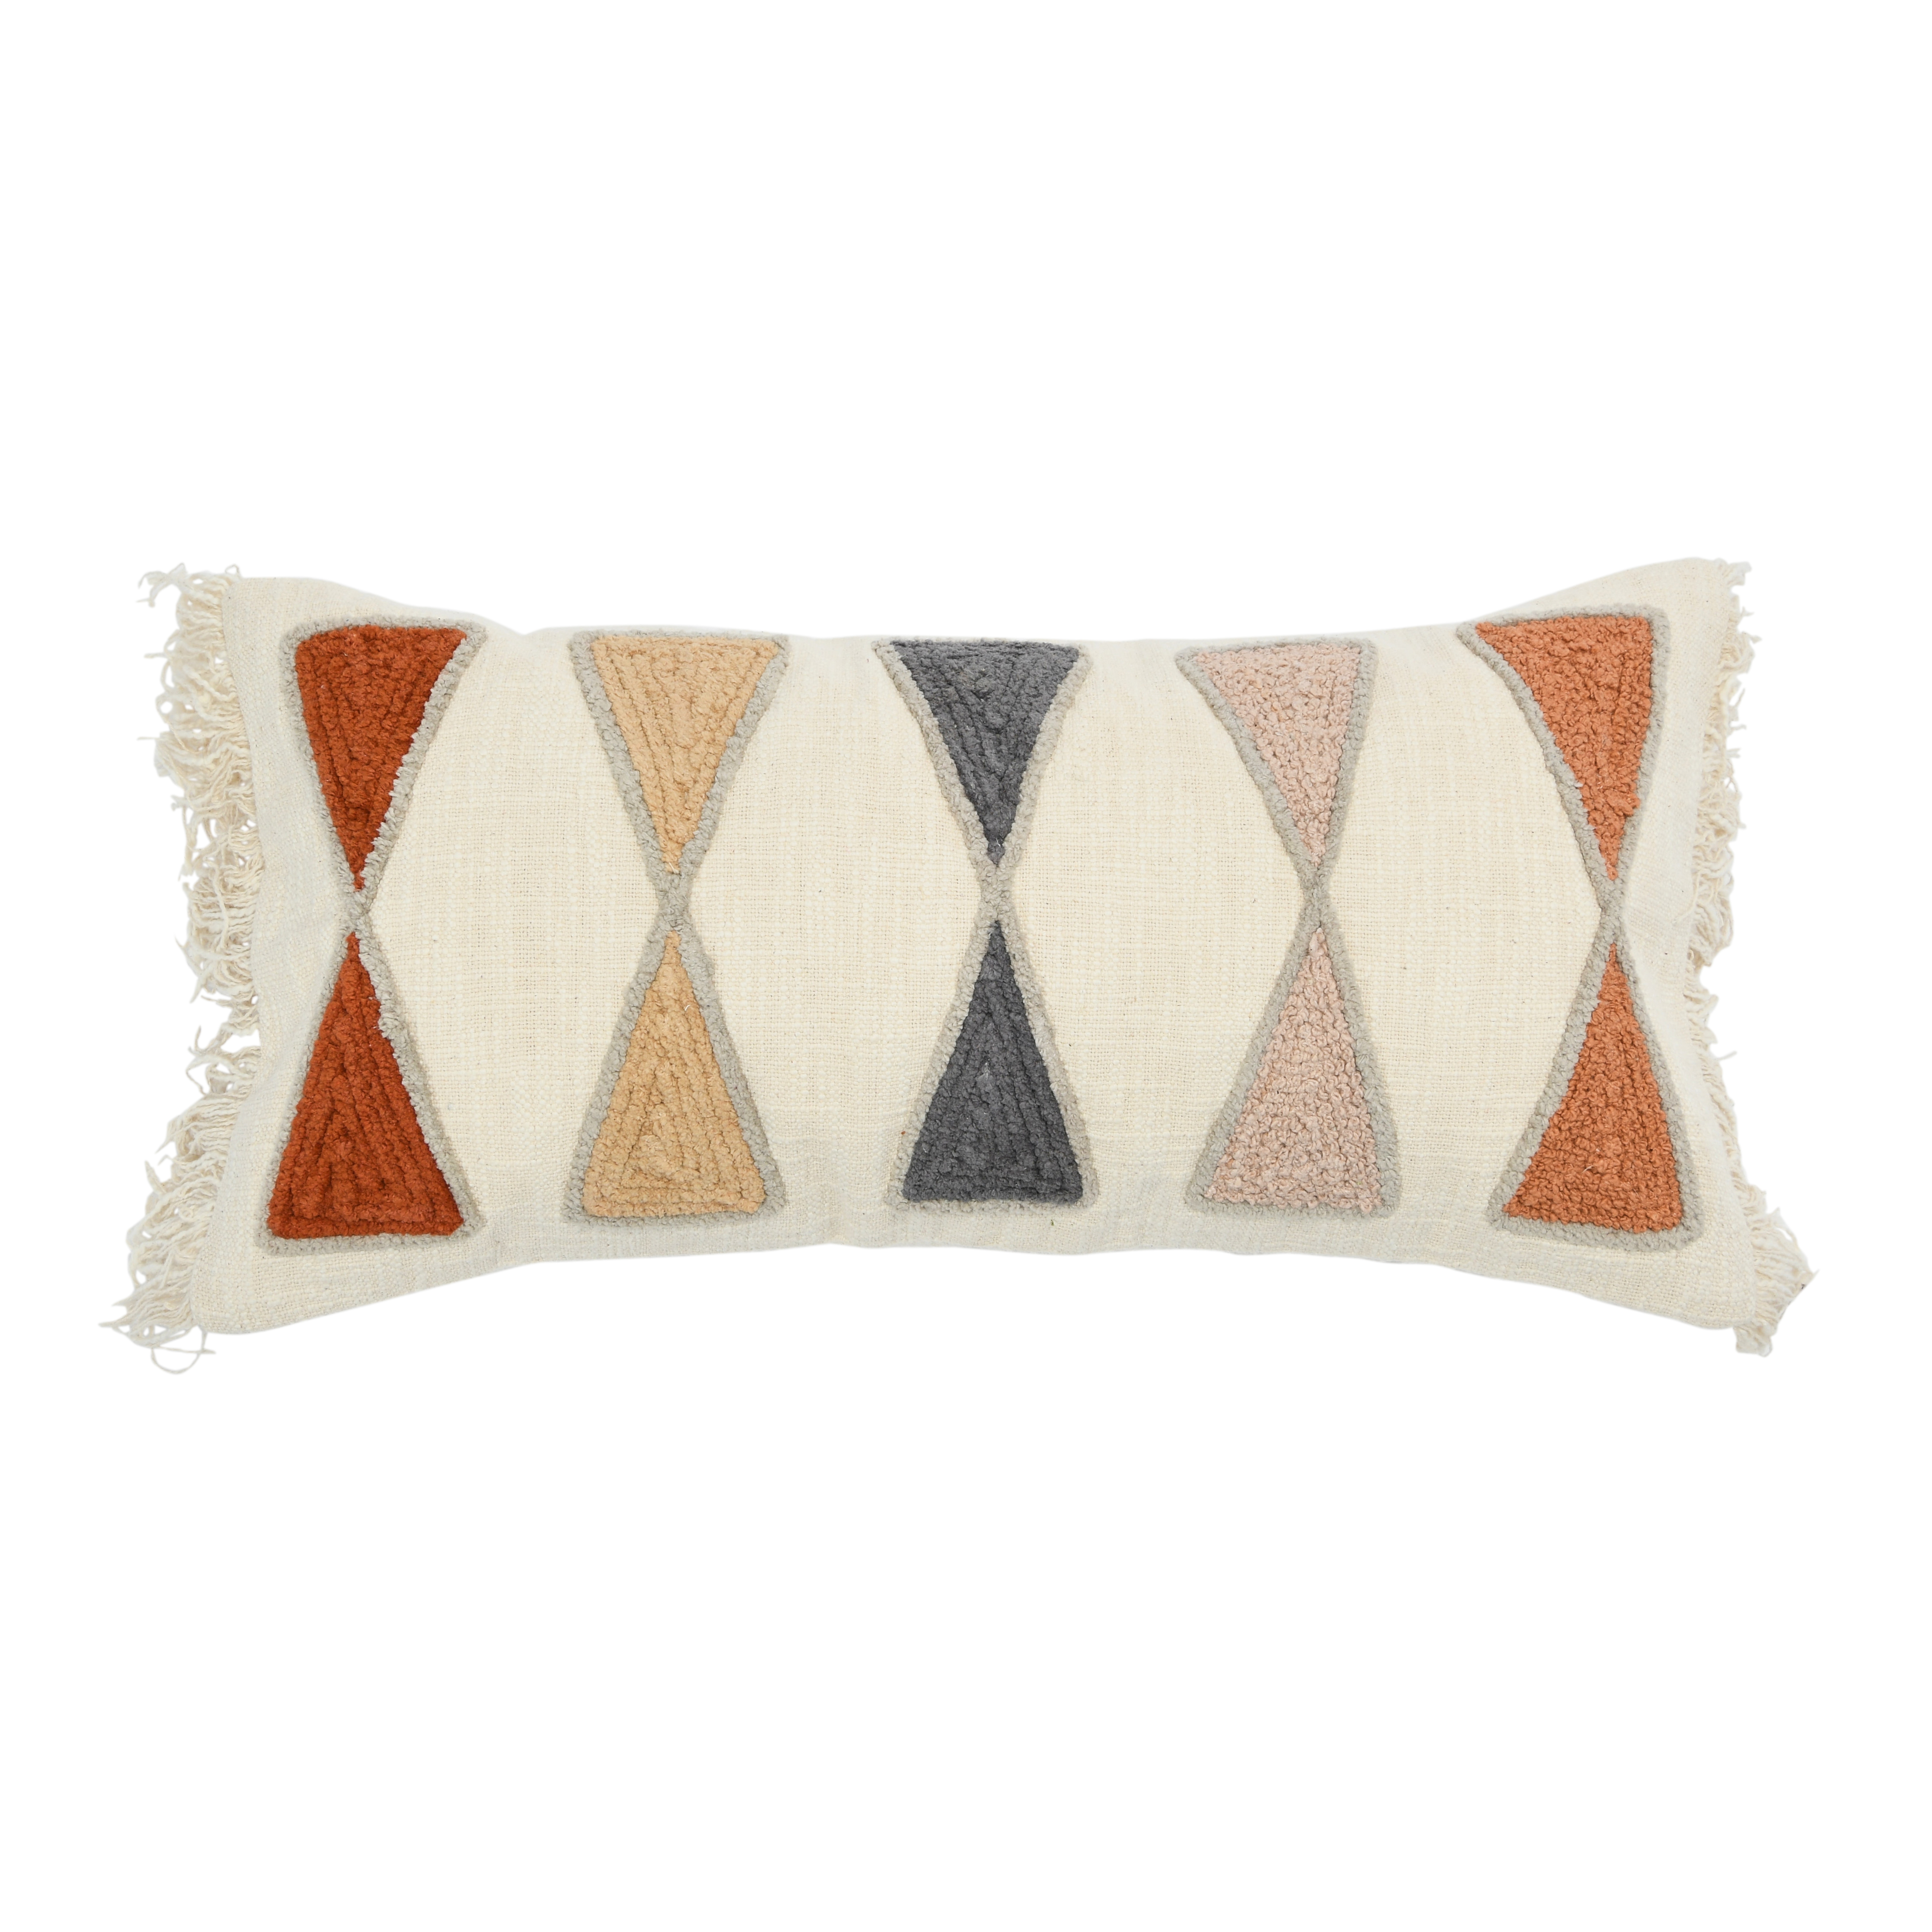 Embroidered Cotton Lumbar Pillow with Fringe - Nomad Home